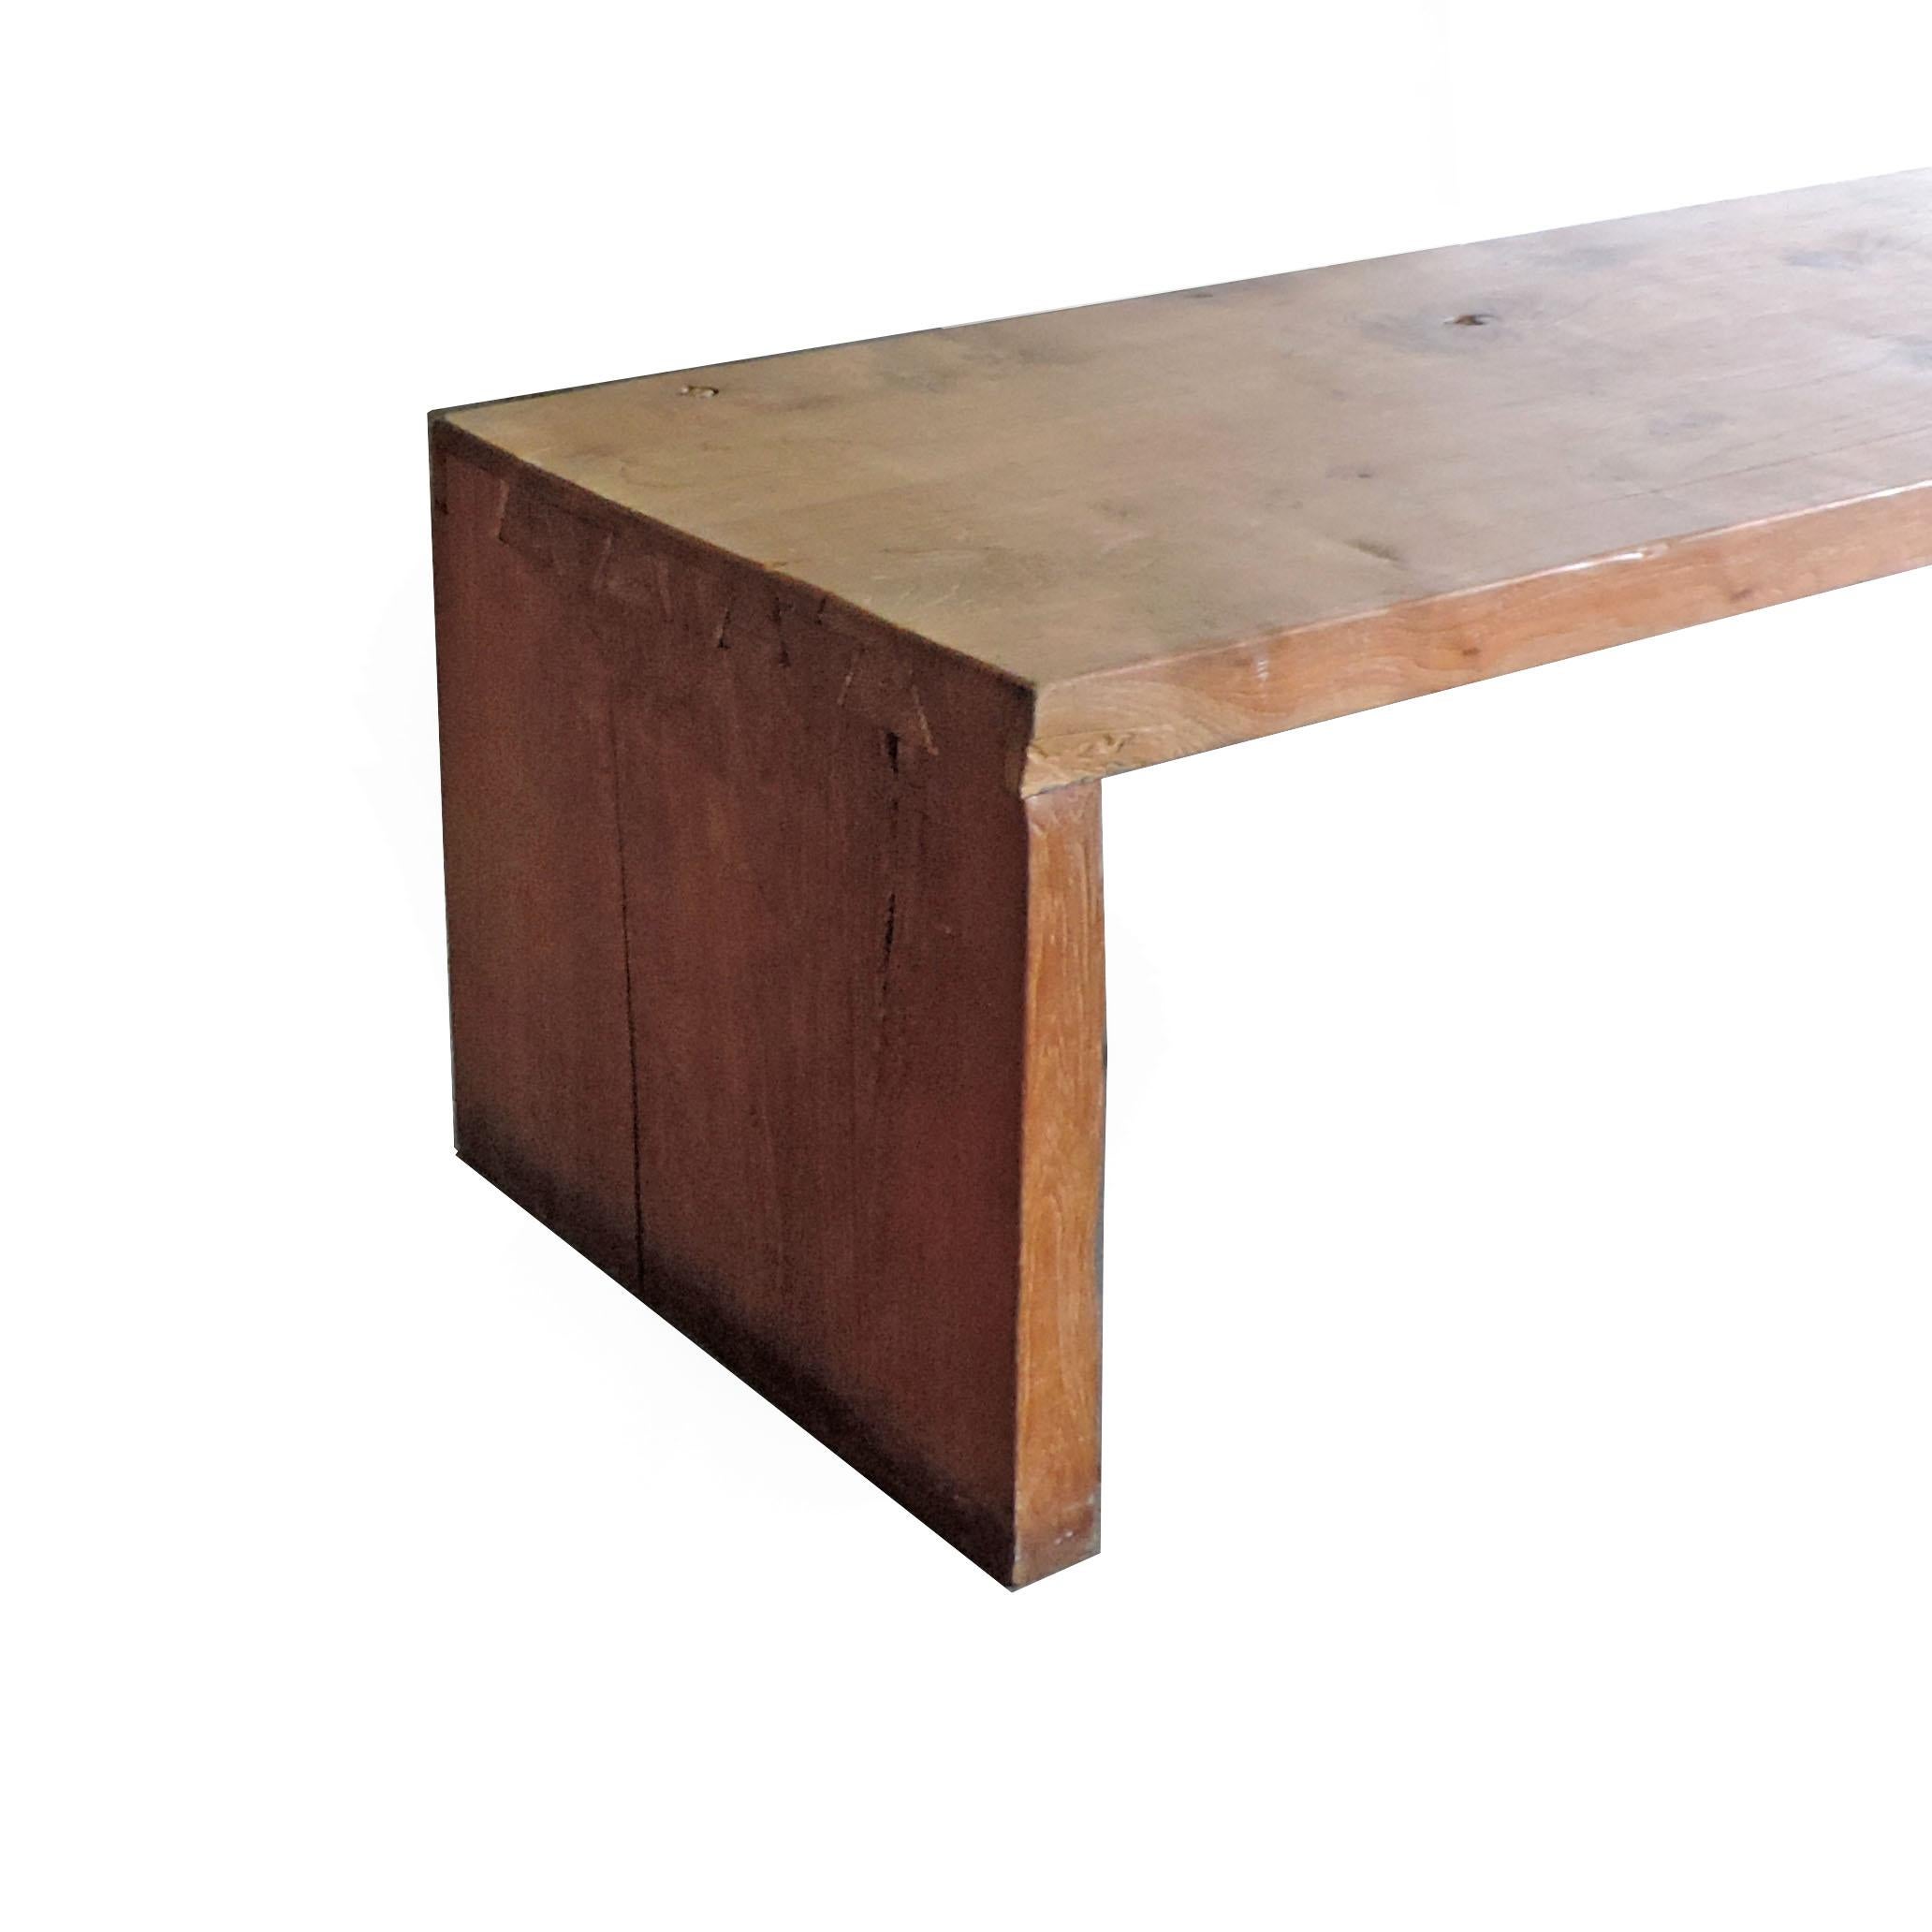 Monumental American Craft wooden bench, 1970s
One-piece wood top.